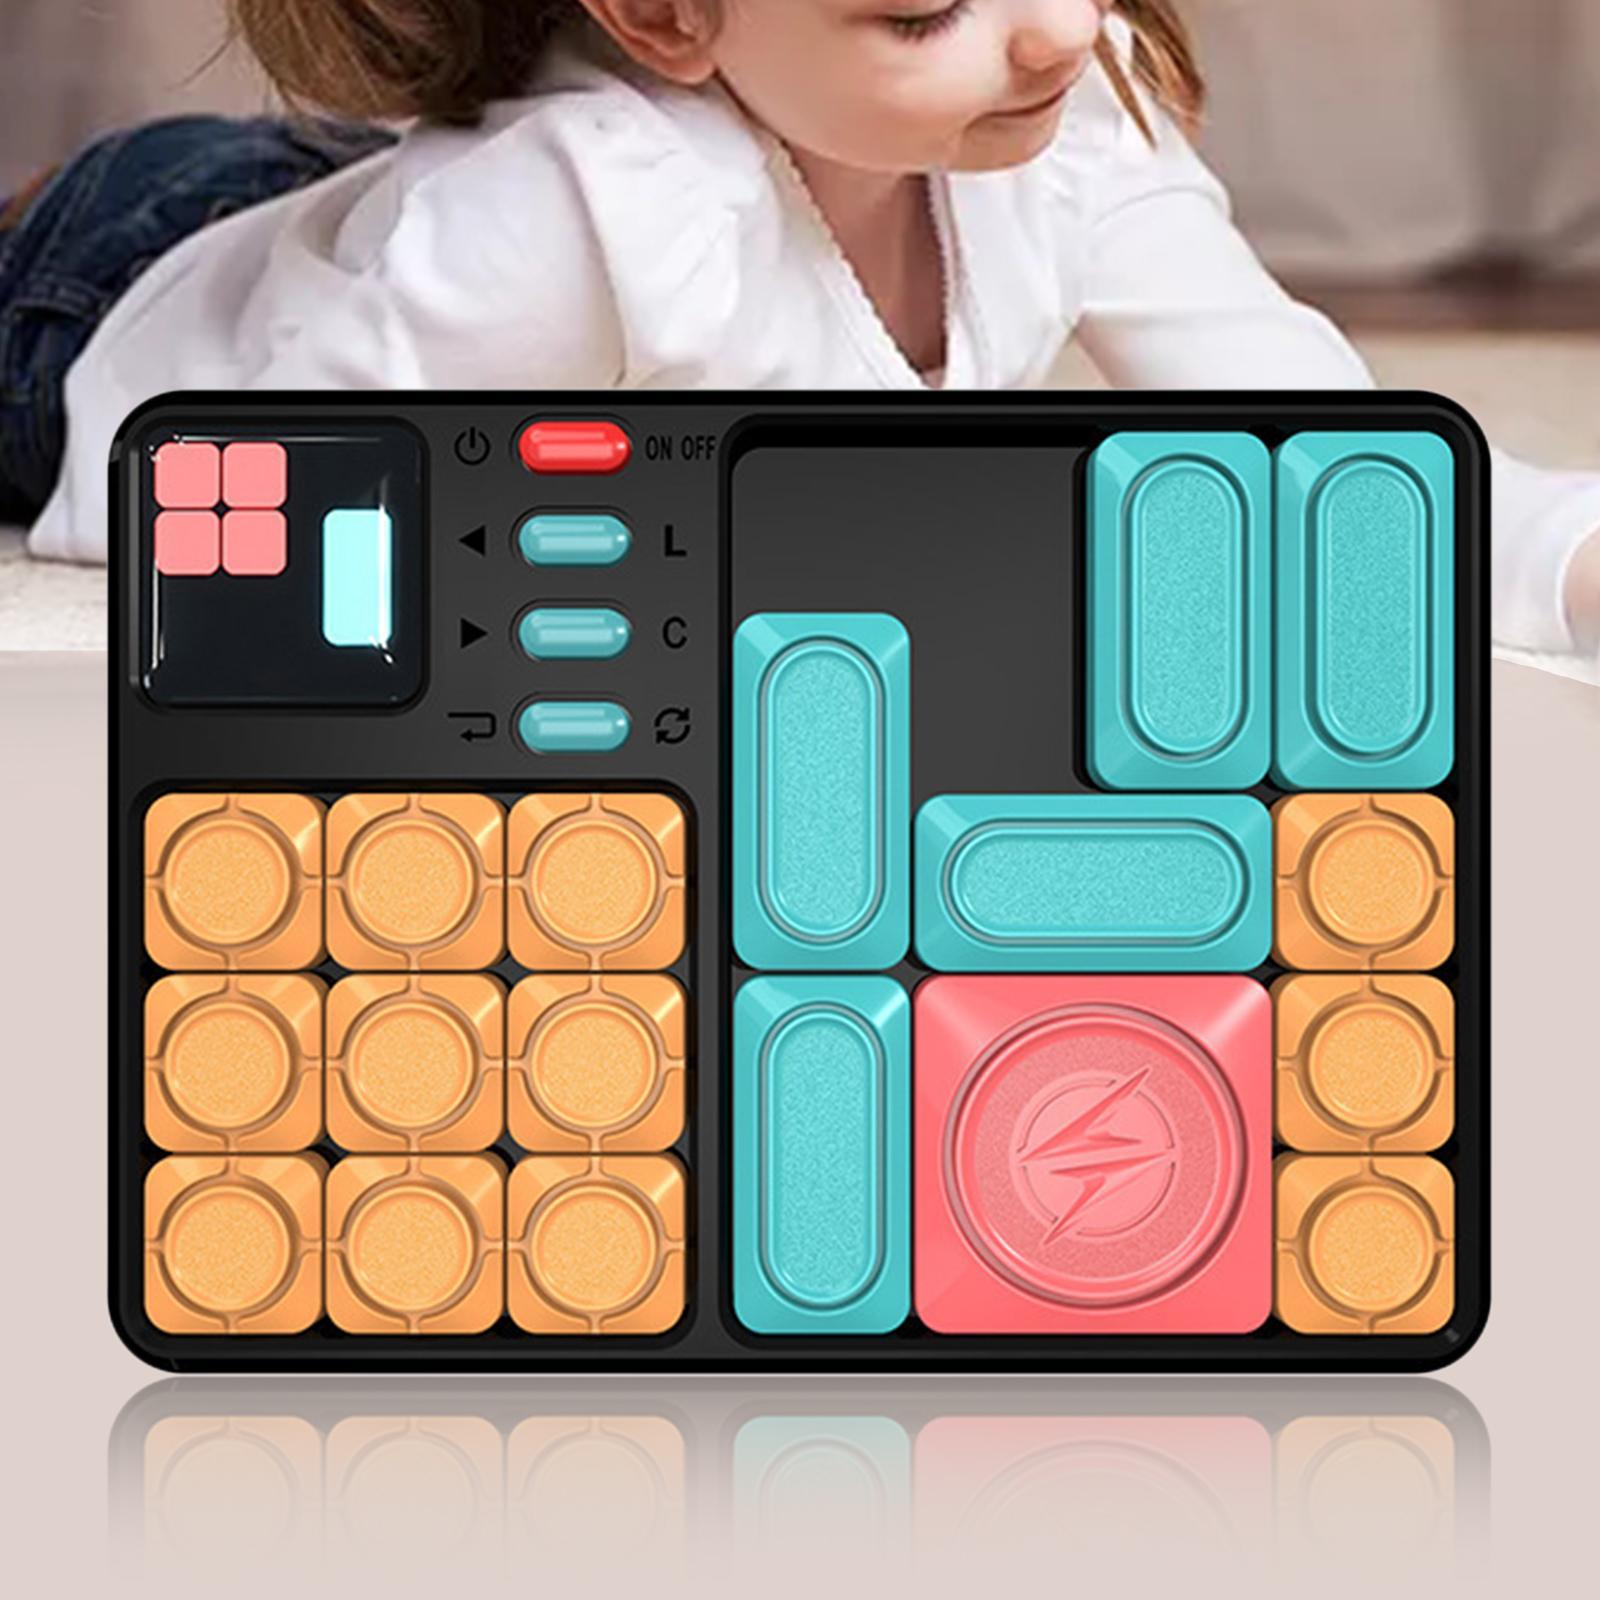 Slide Games Interactive Brain Teaser 500+ Levels Puzzles  Ages